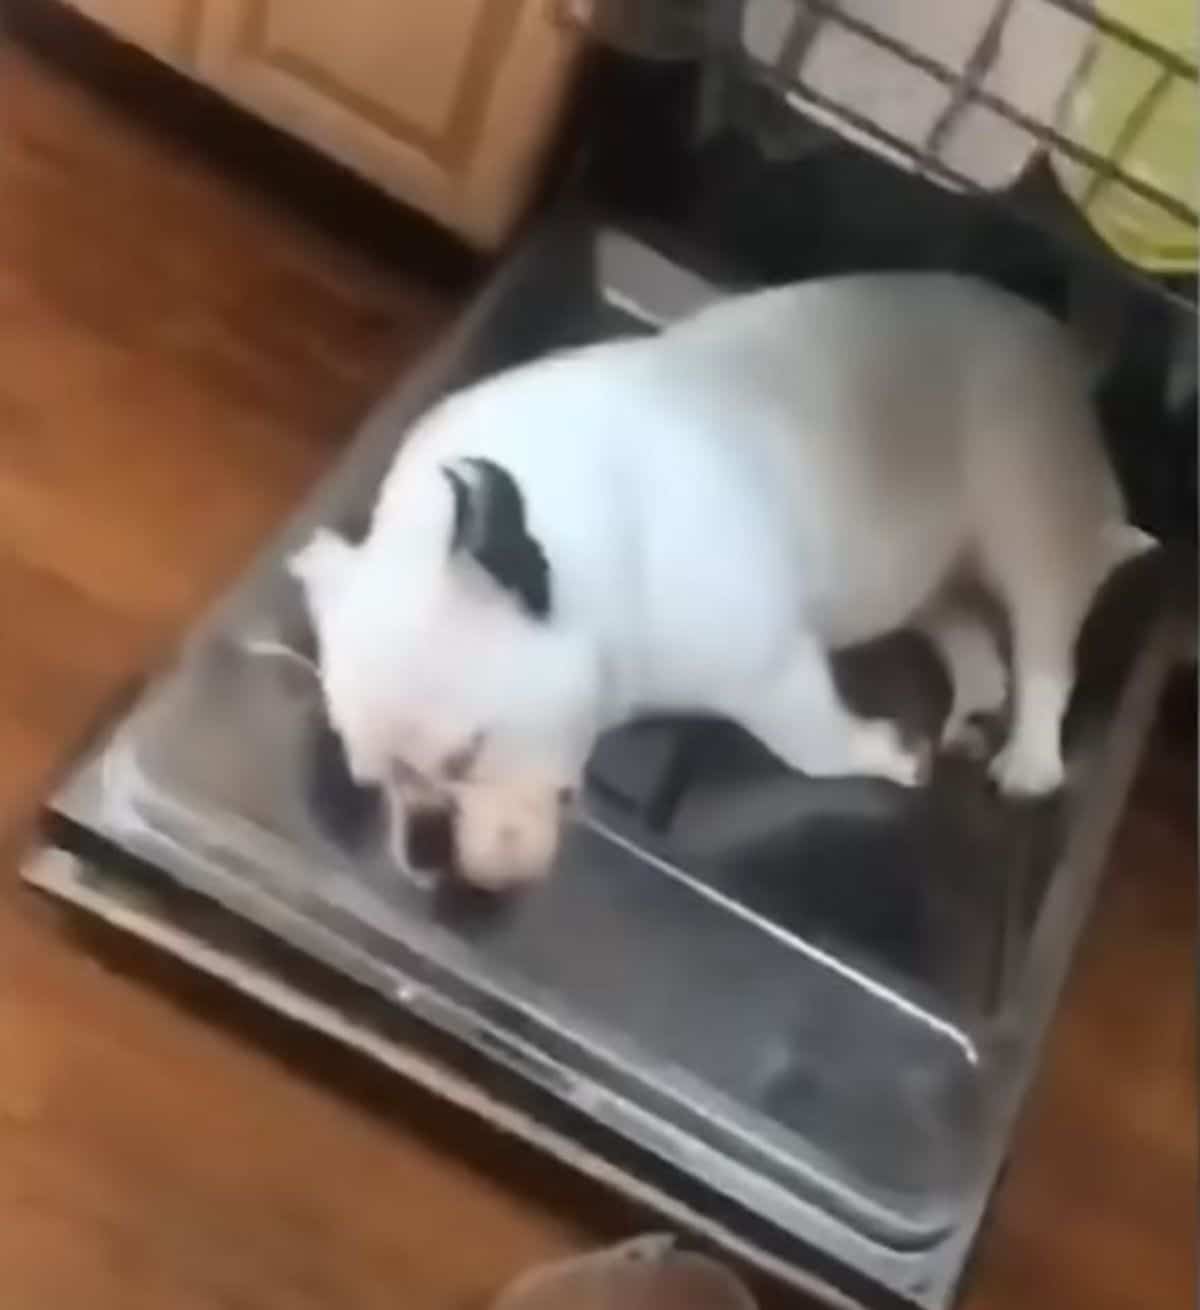 black and white bulldog sleeping on the open door of a dishwasher